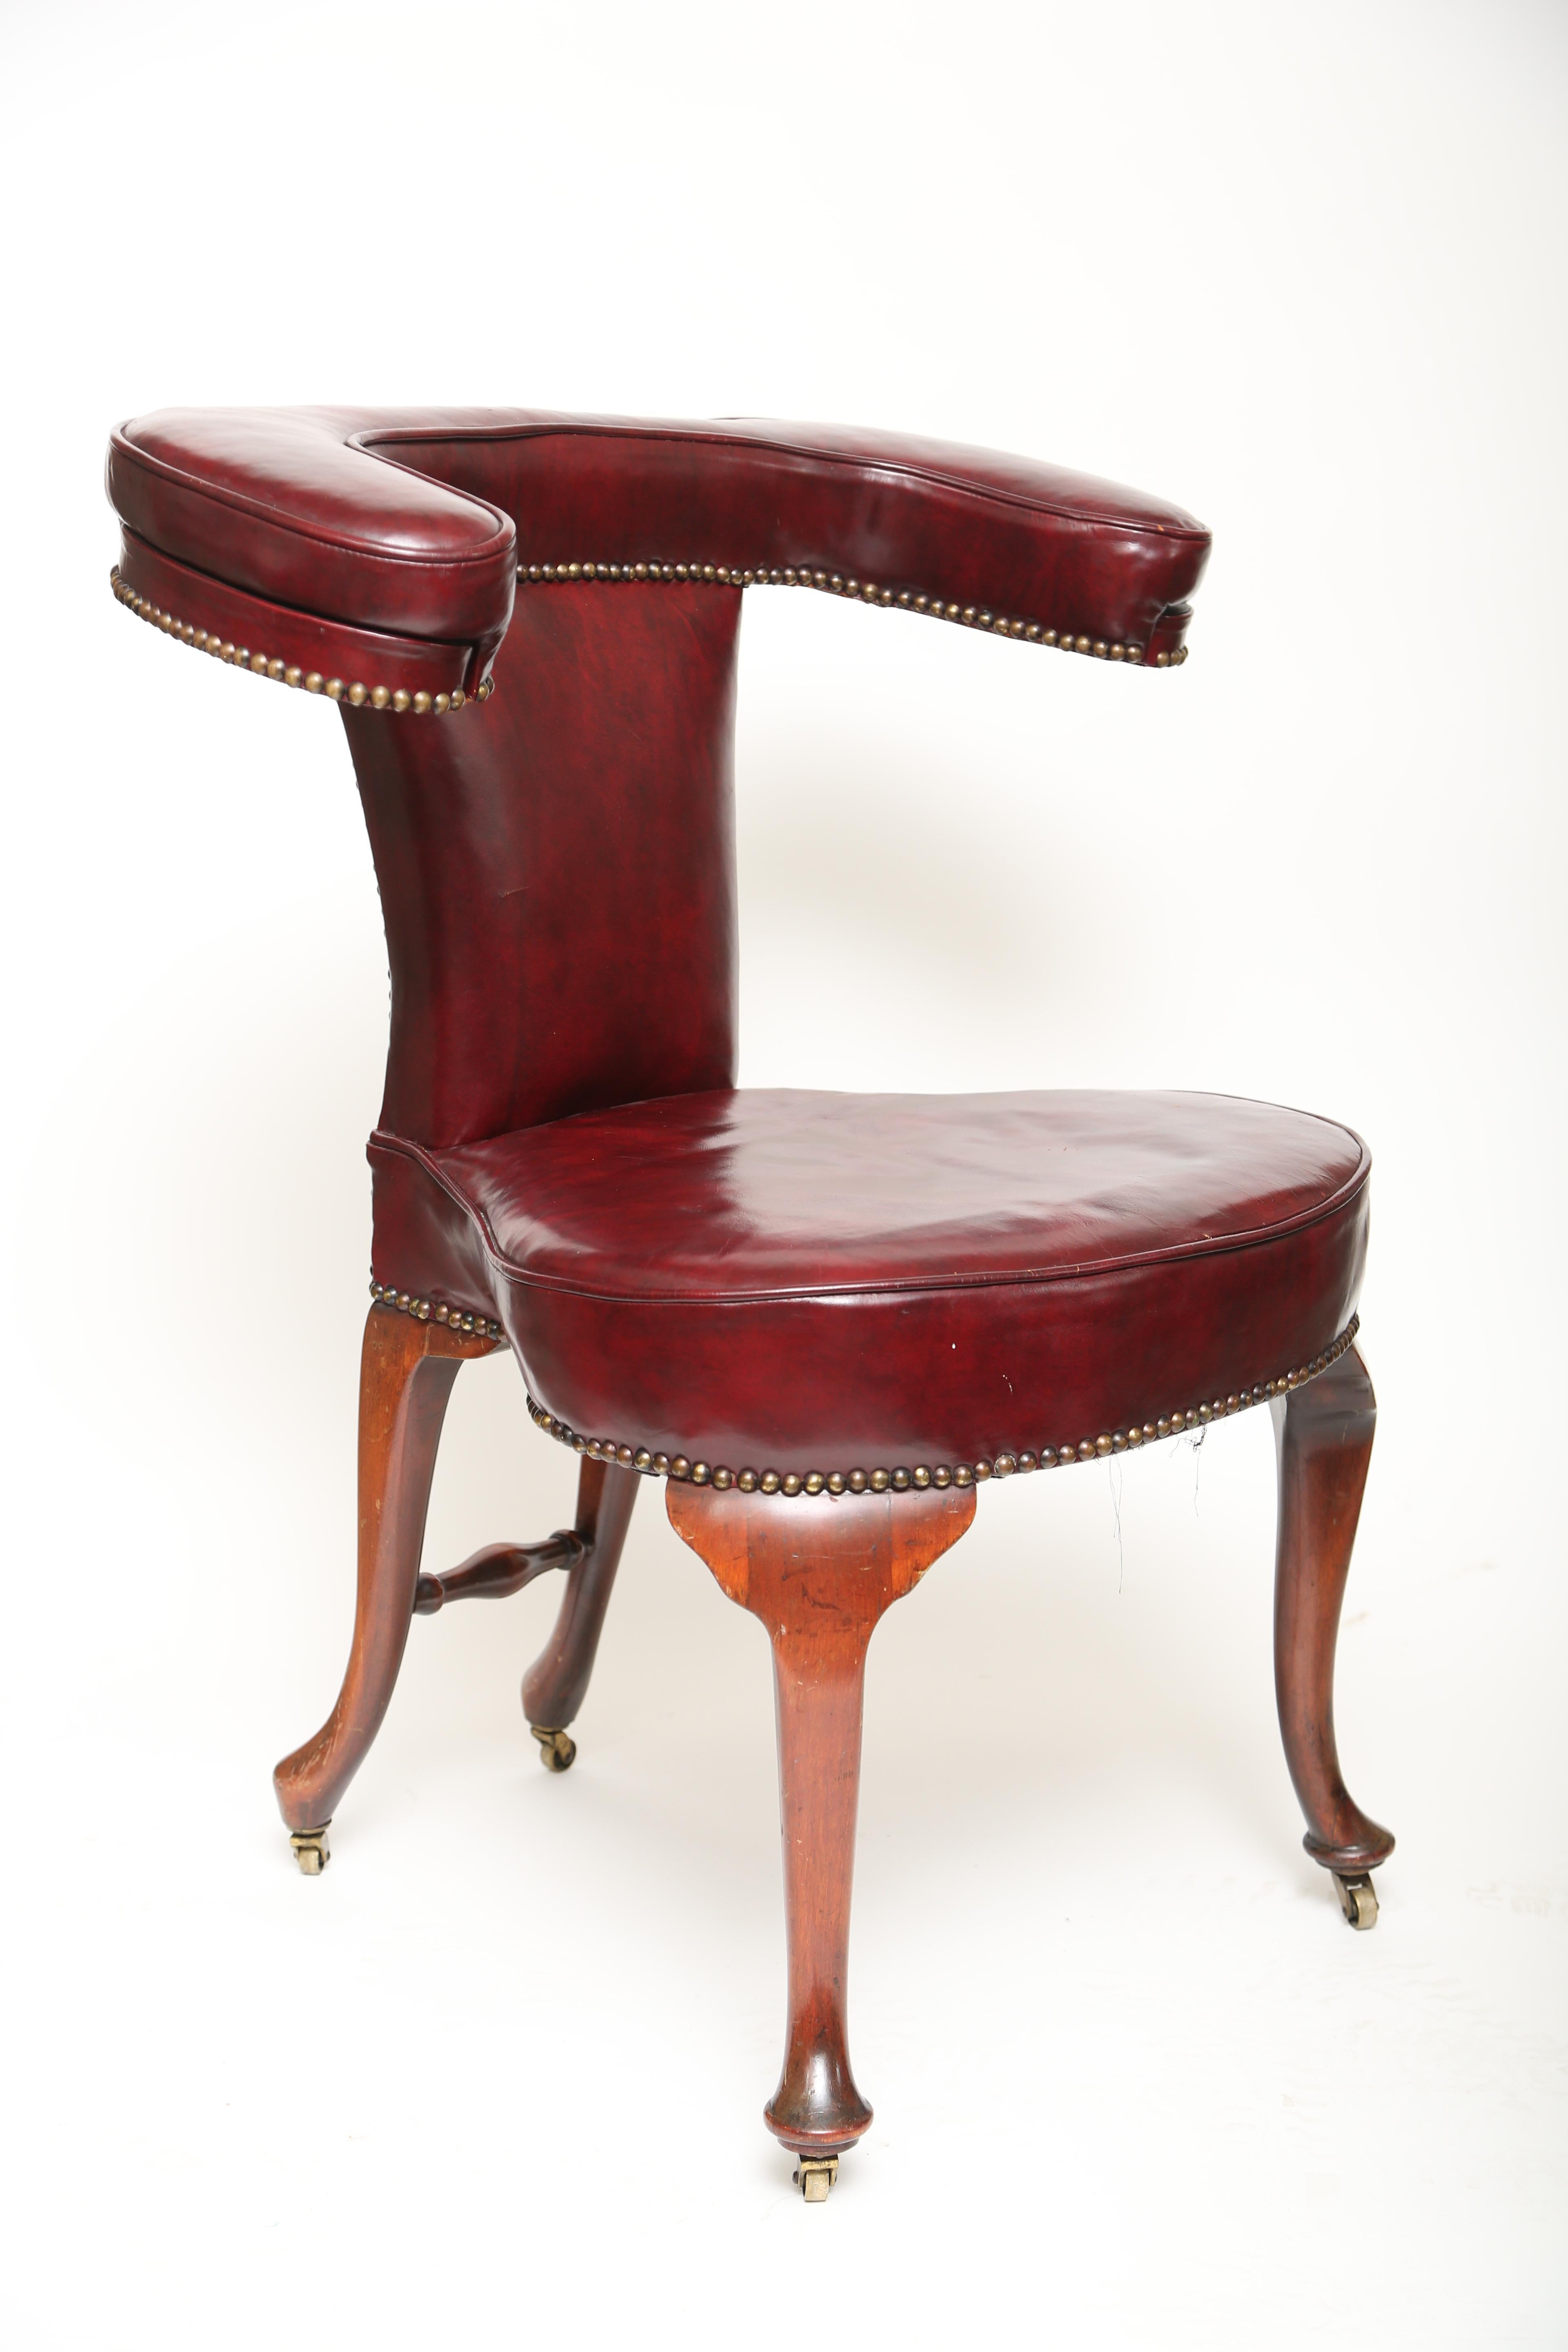 English Cock Fighting Chair-Mahogany, Red Leather, Brass Nailheads-Eng., 19th c 1